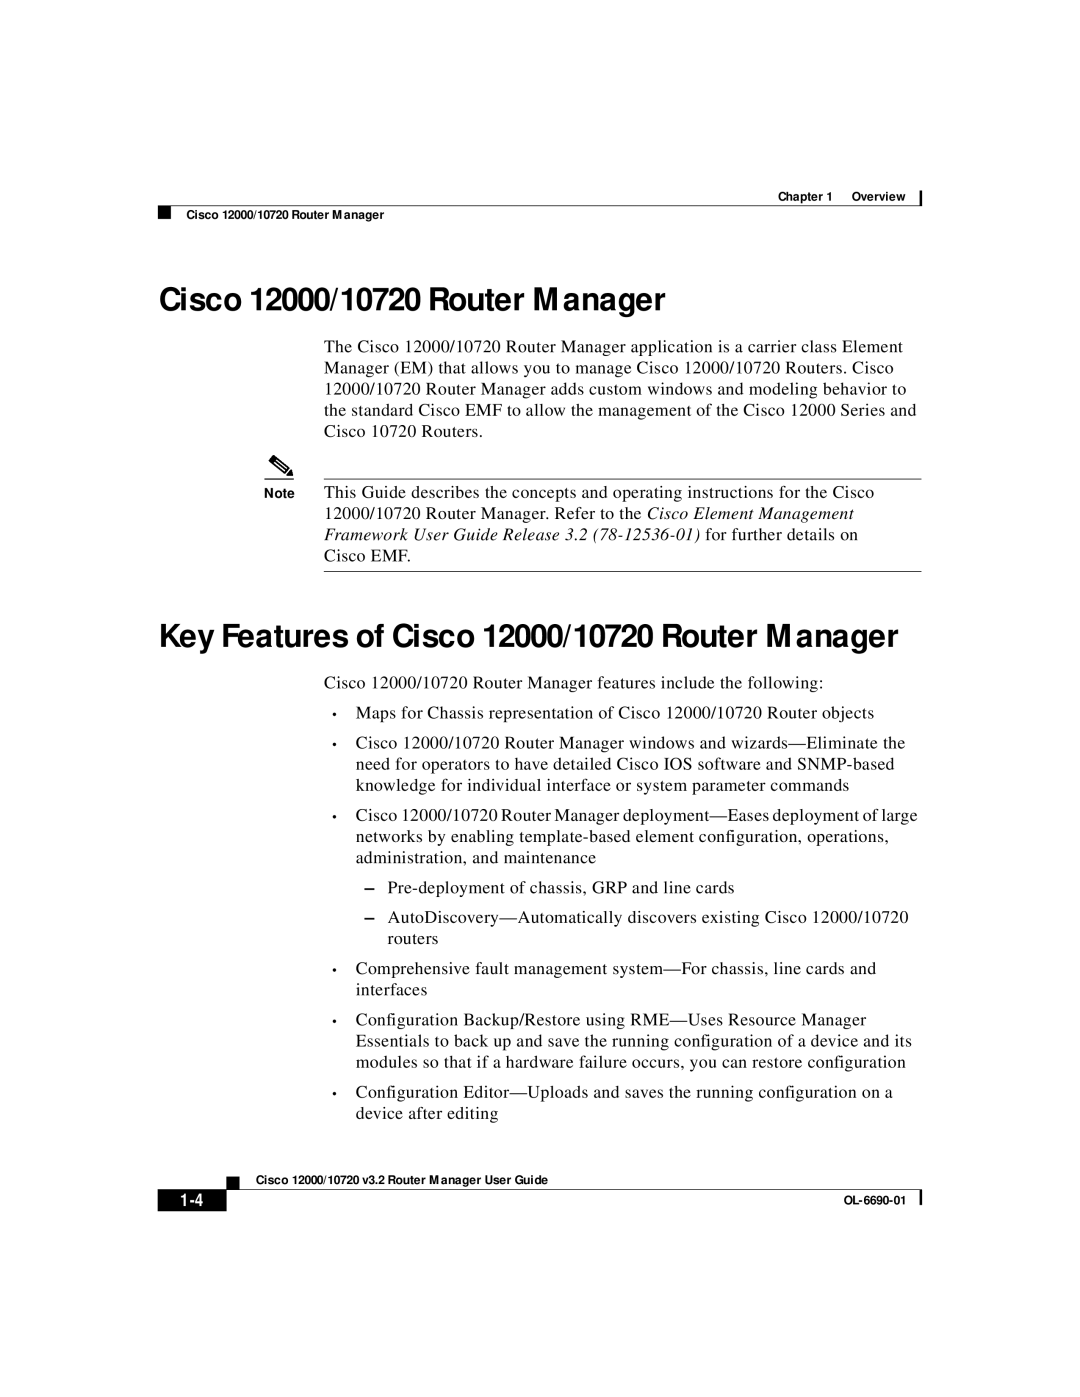 Cisco Systems Cisco 12008, Cisco 12416, Cisco 12016, Cisco 10720 manual Key Features of Cisco 12000/10720 Router Manager 